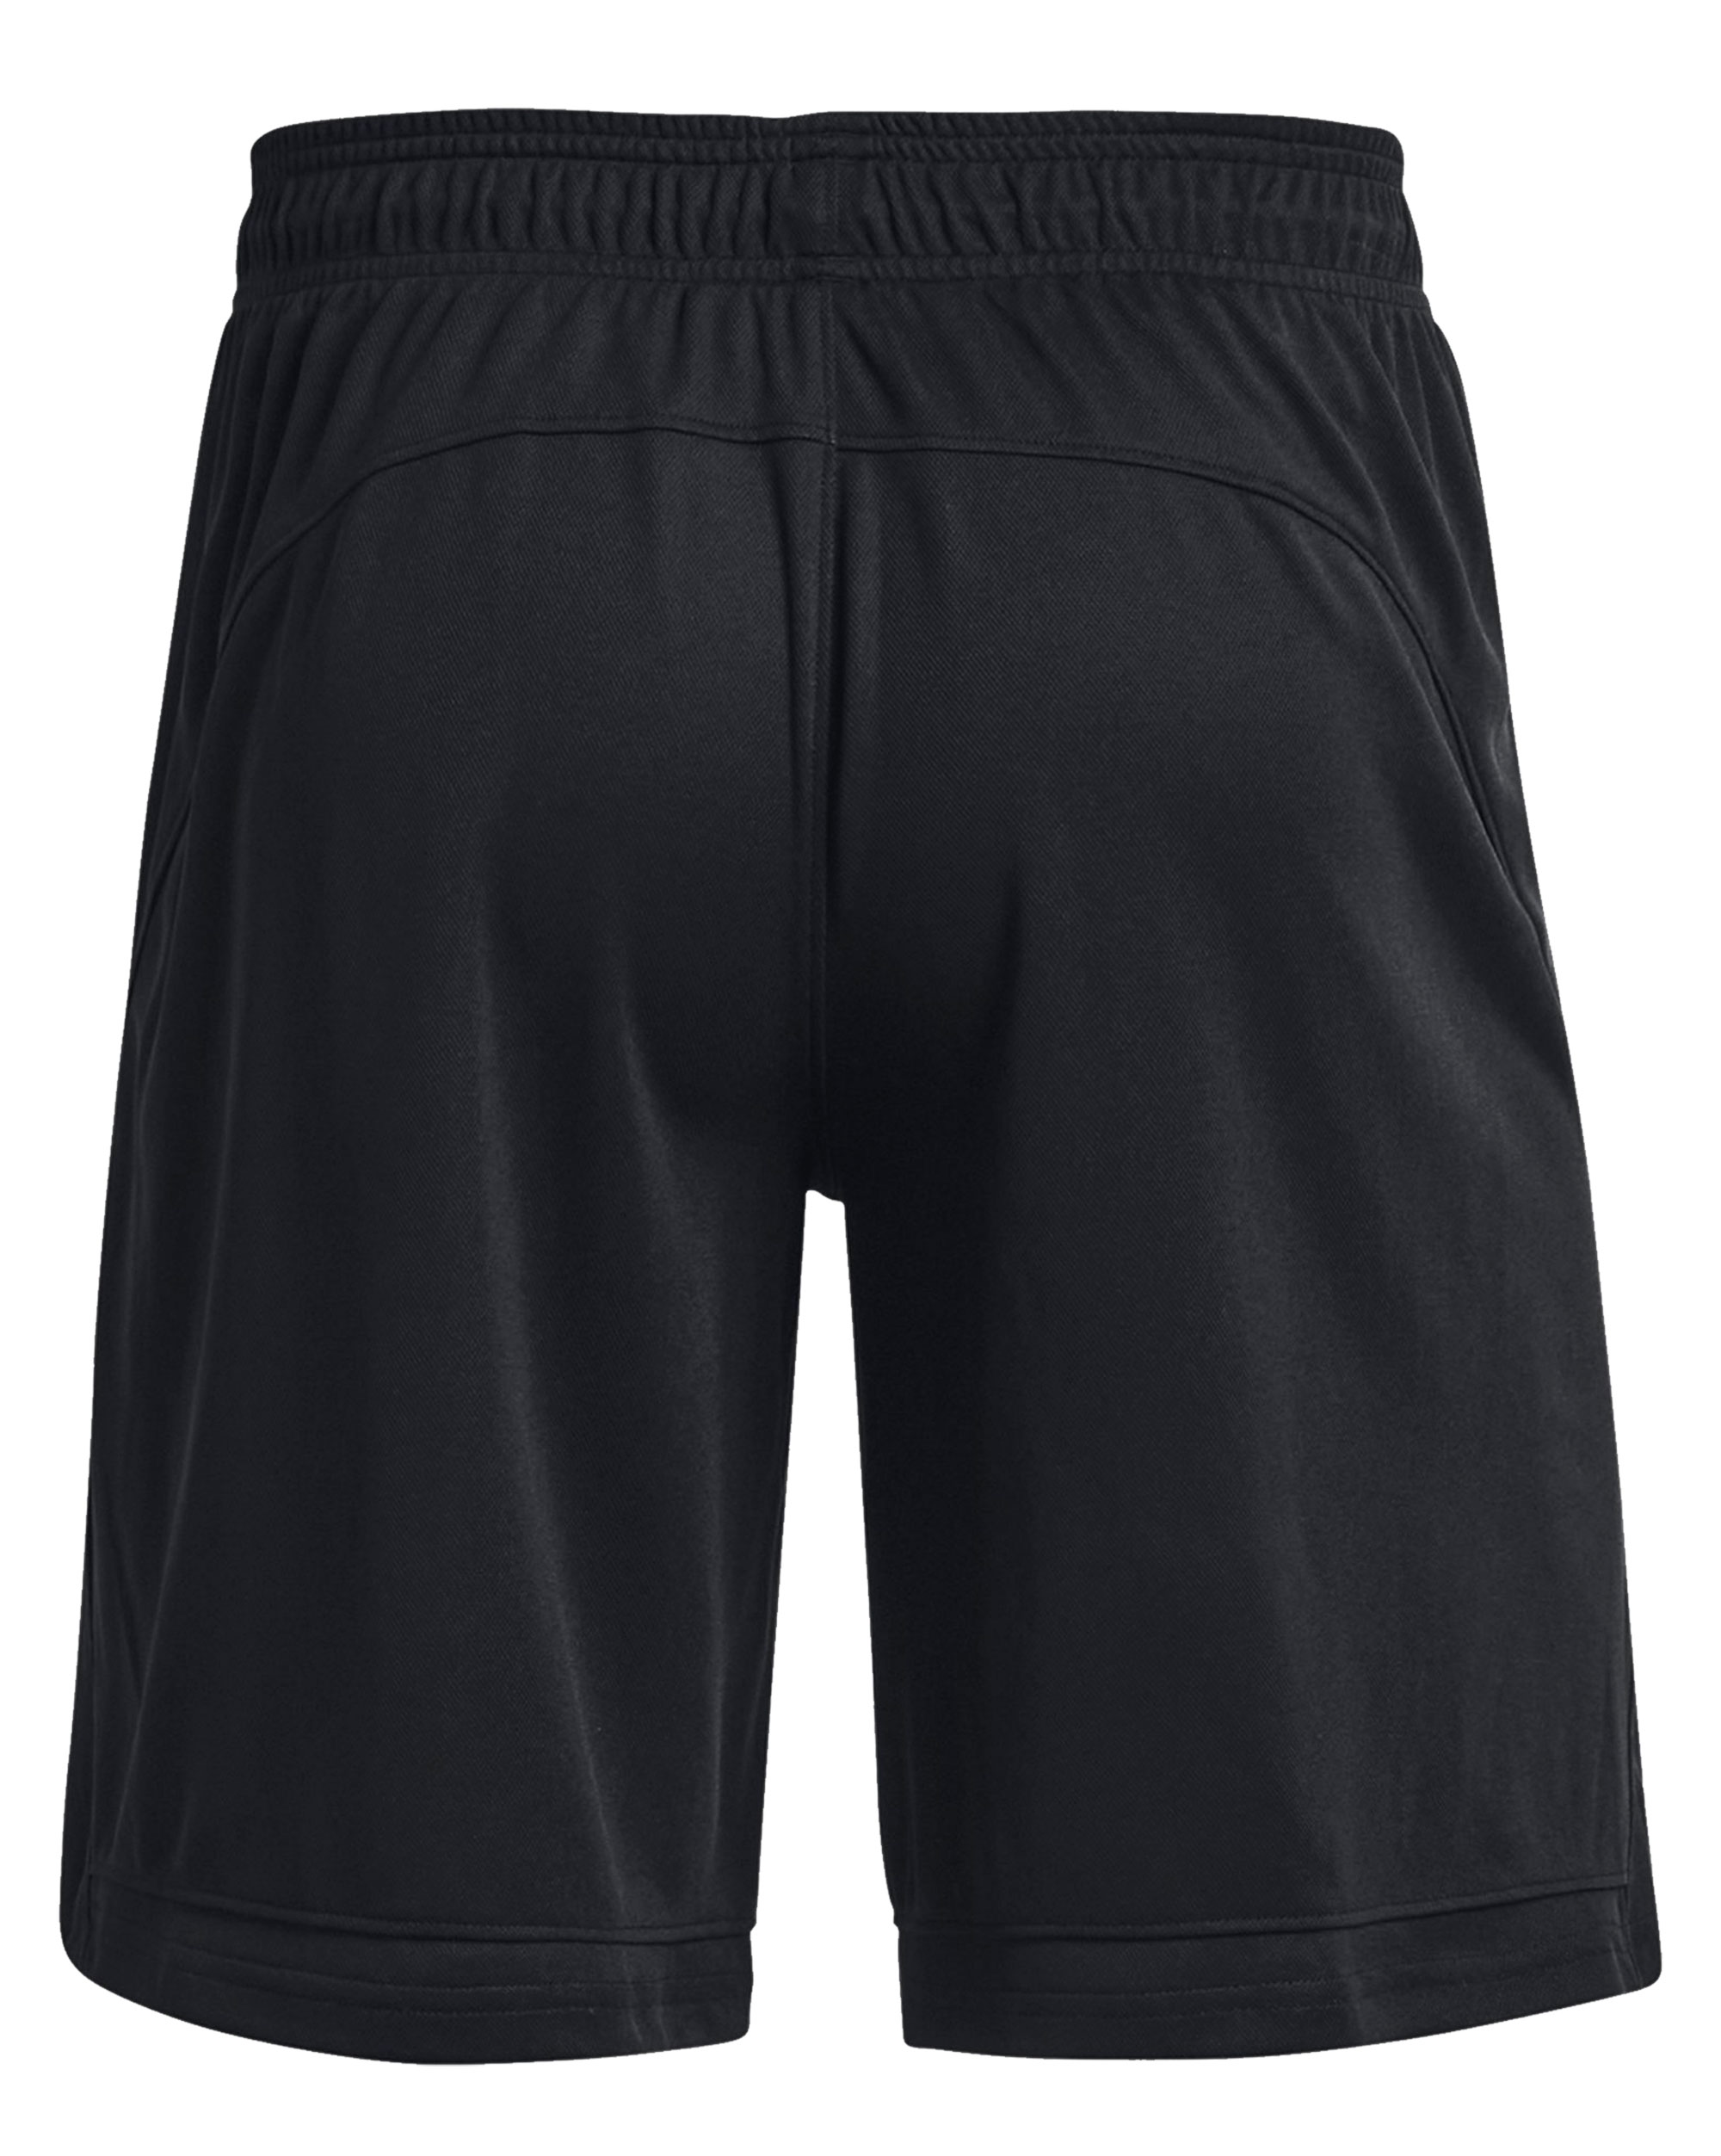 Under Armour Mens Baseline Shorts | Recon Company